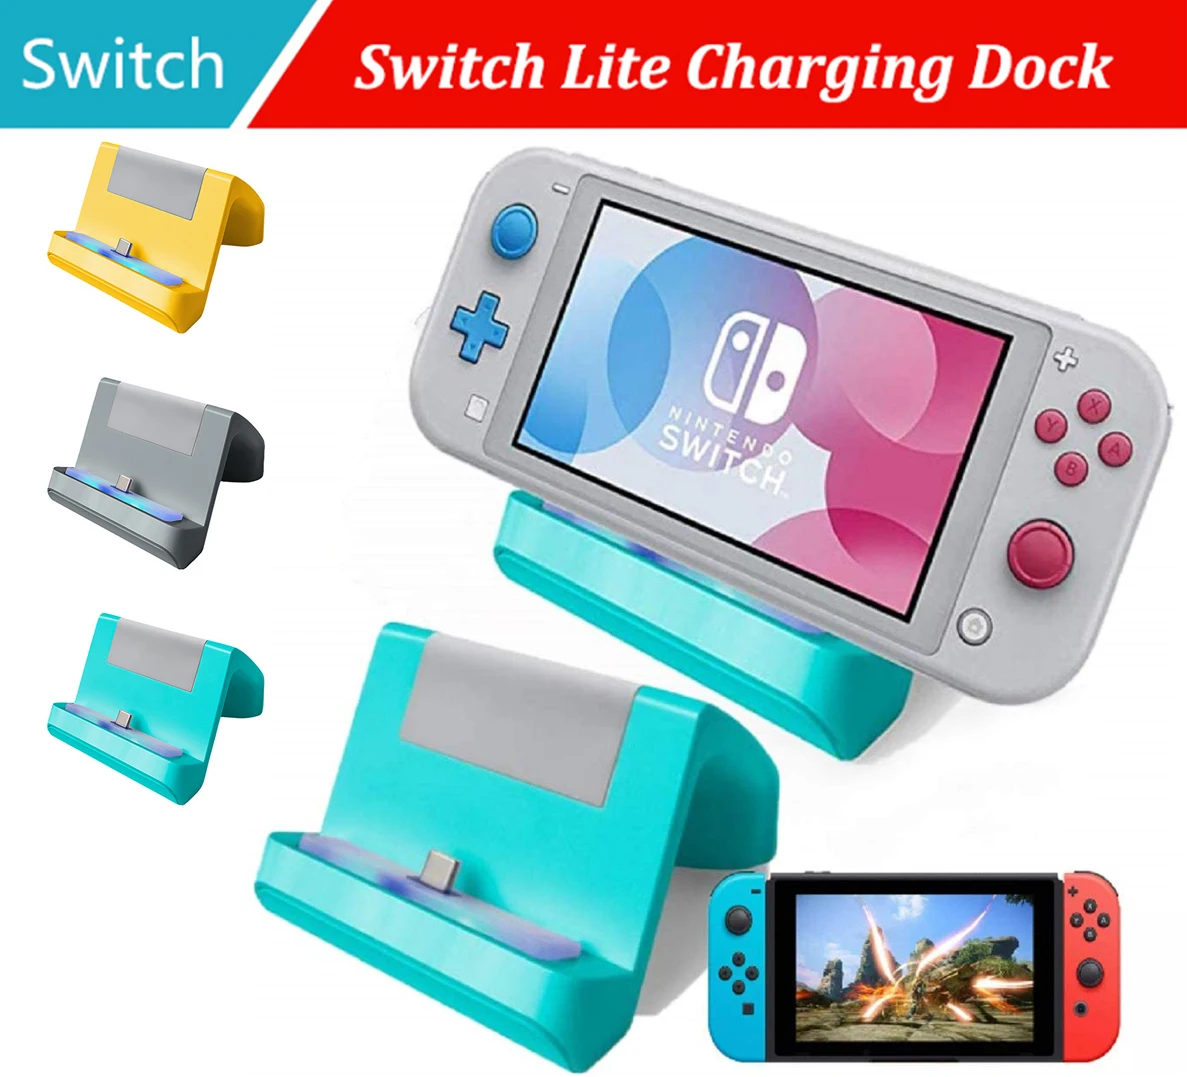 LED Portable Fast Charger Stand Replacement Type C Charging Dock Station with USB Cable For Nintendo Switch / Switch Lite